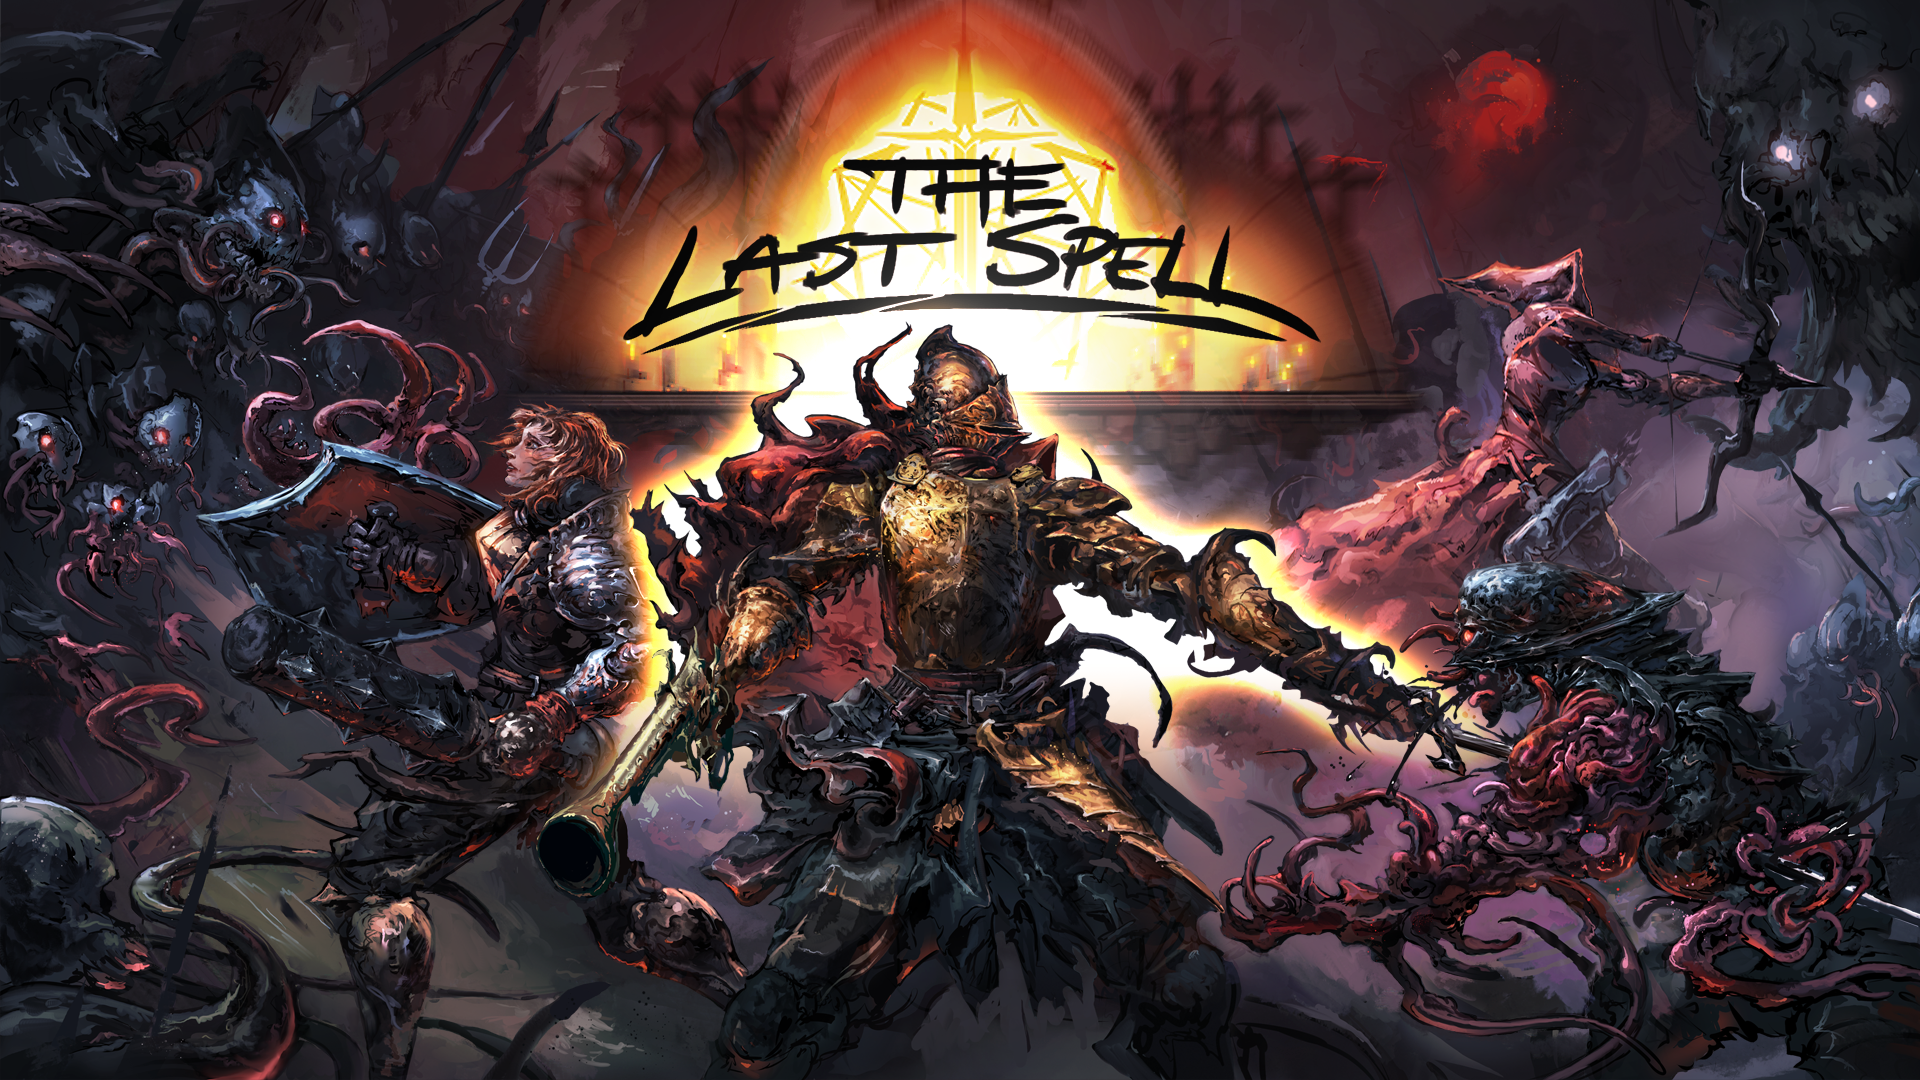 Video Game The Last Spell HD Wallpaper | Background Image